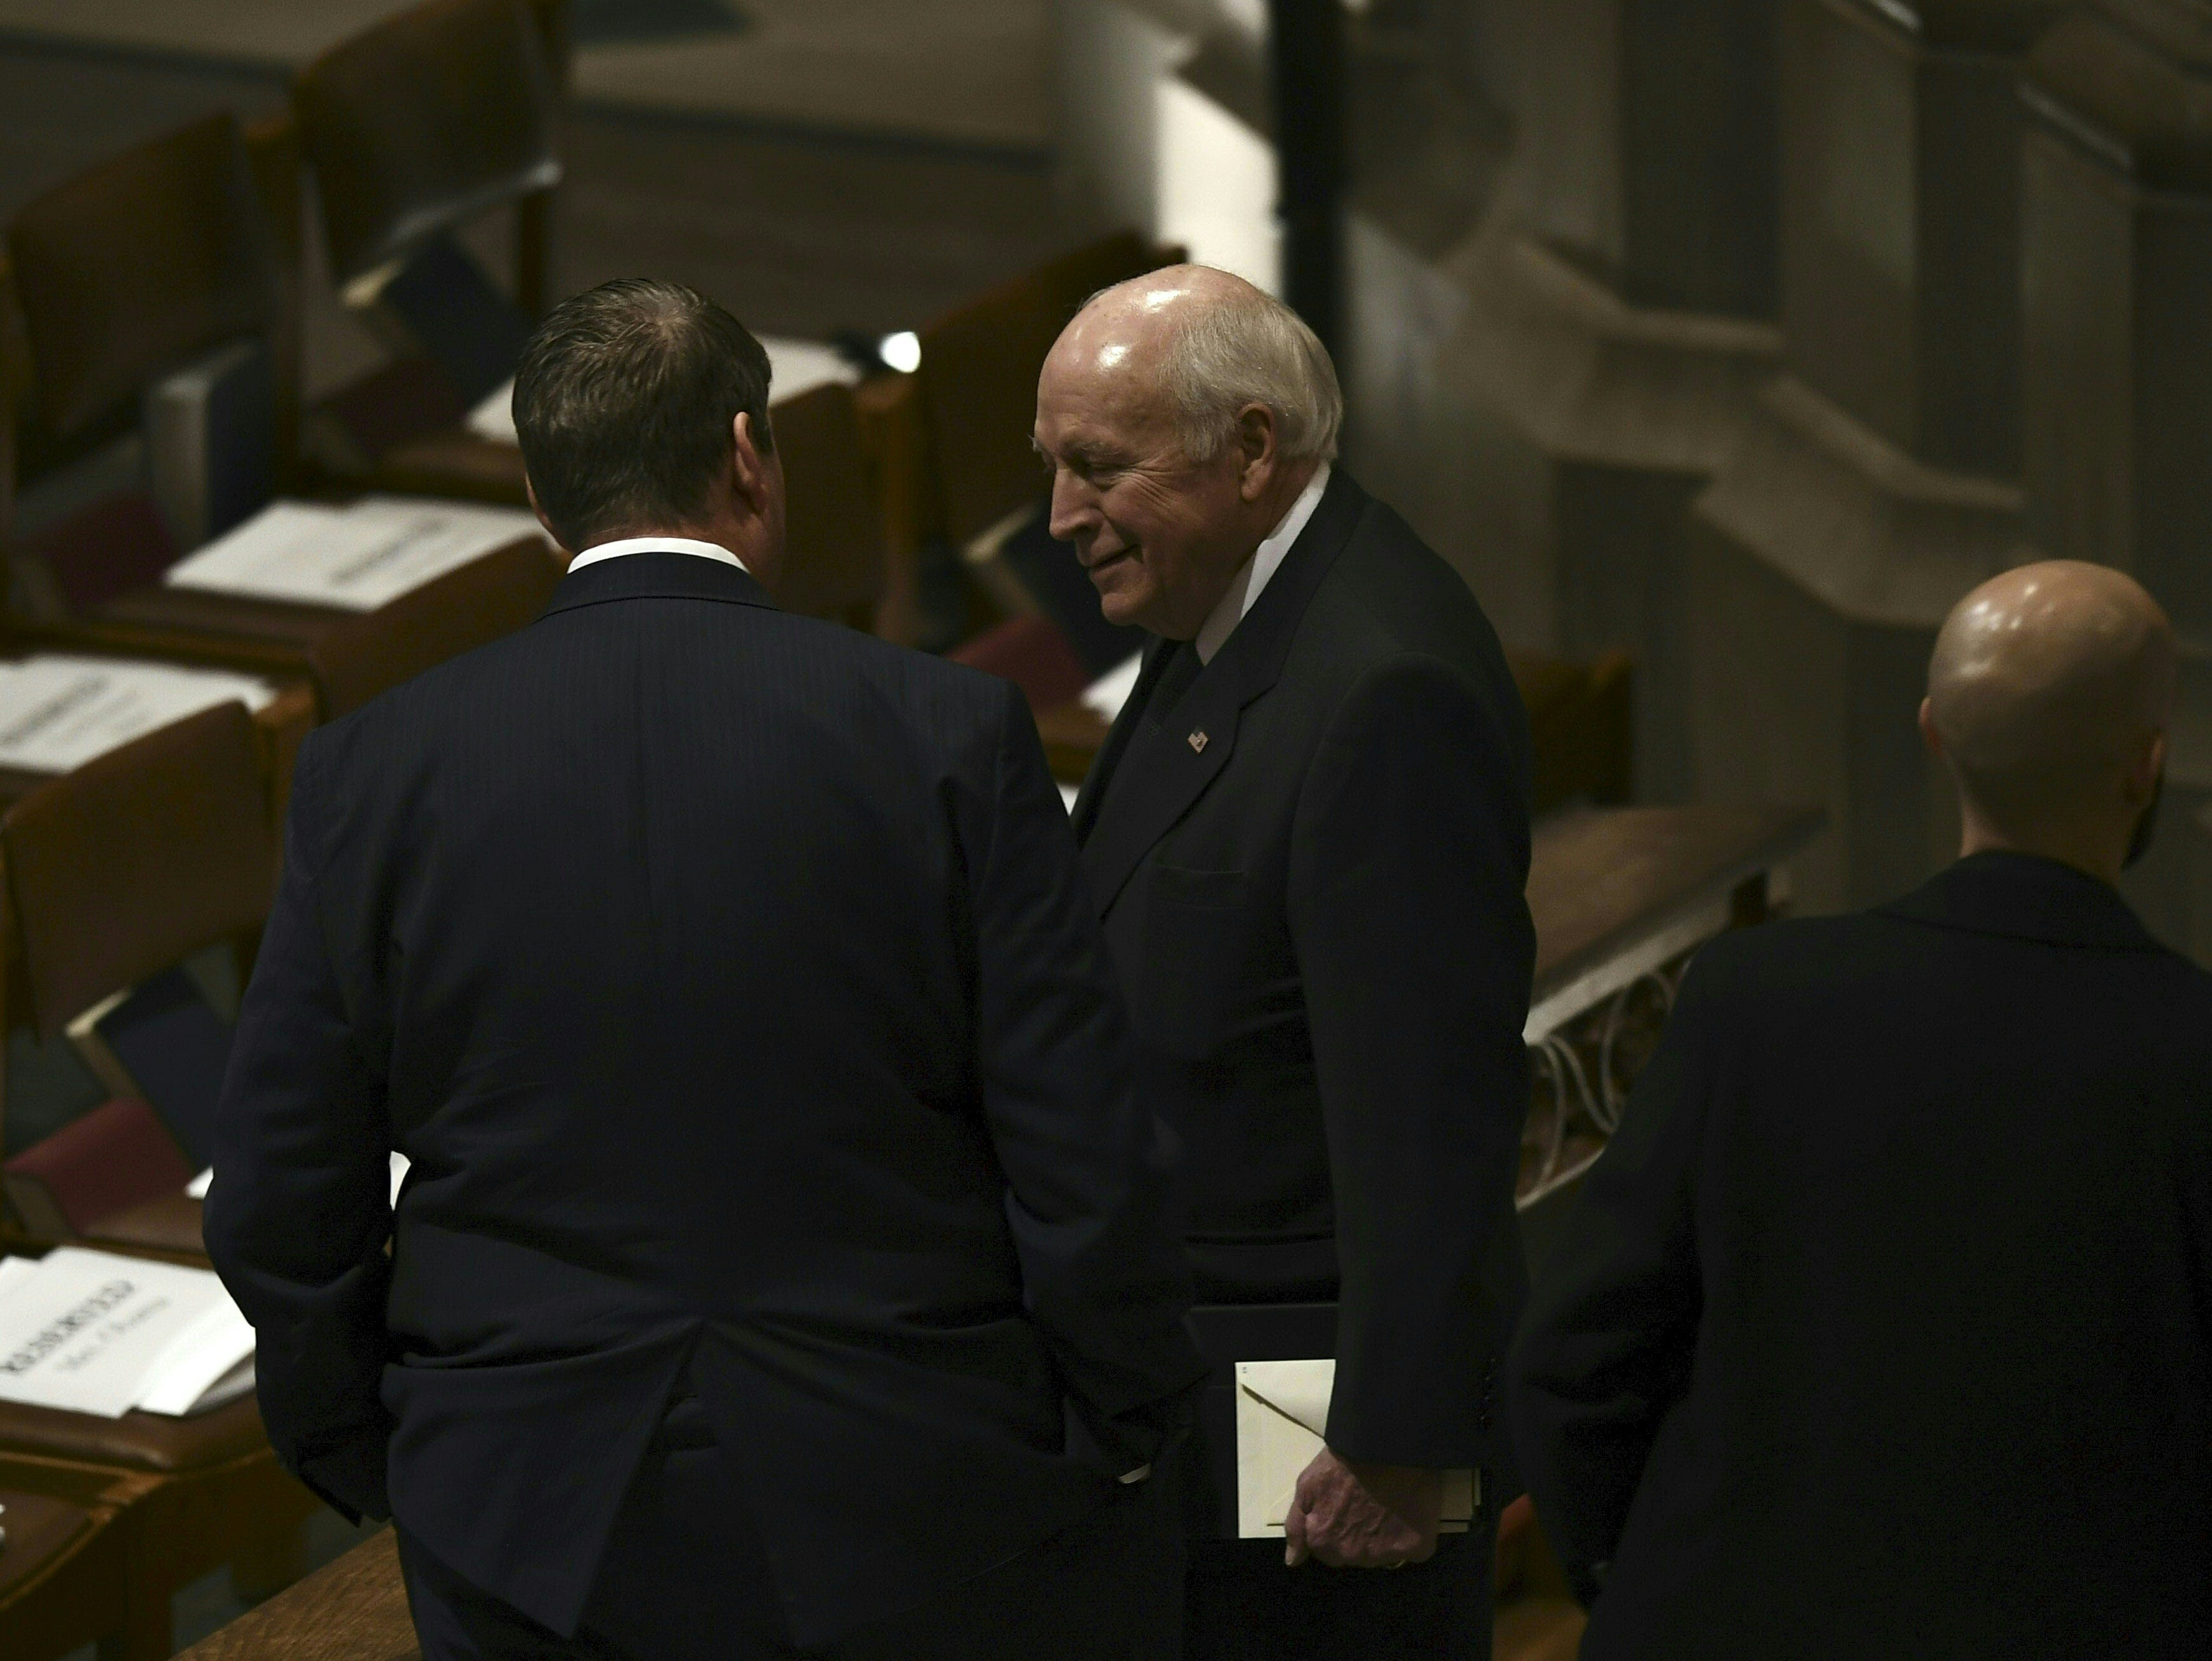 Former US Vice President Dick Cheney arrives for the funeral service for former US President George H.W. Bush at the National Cathedral in Washington.